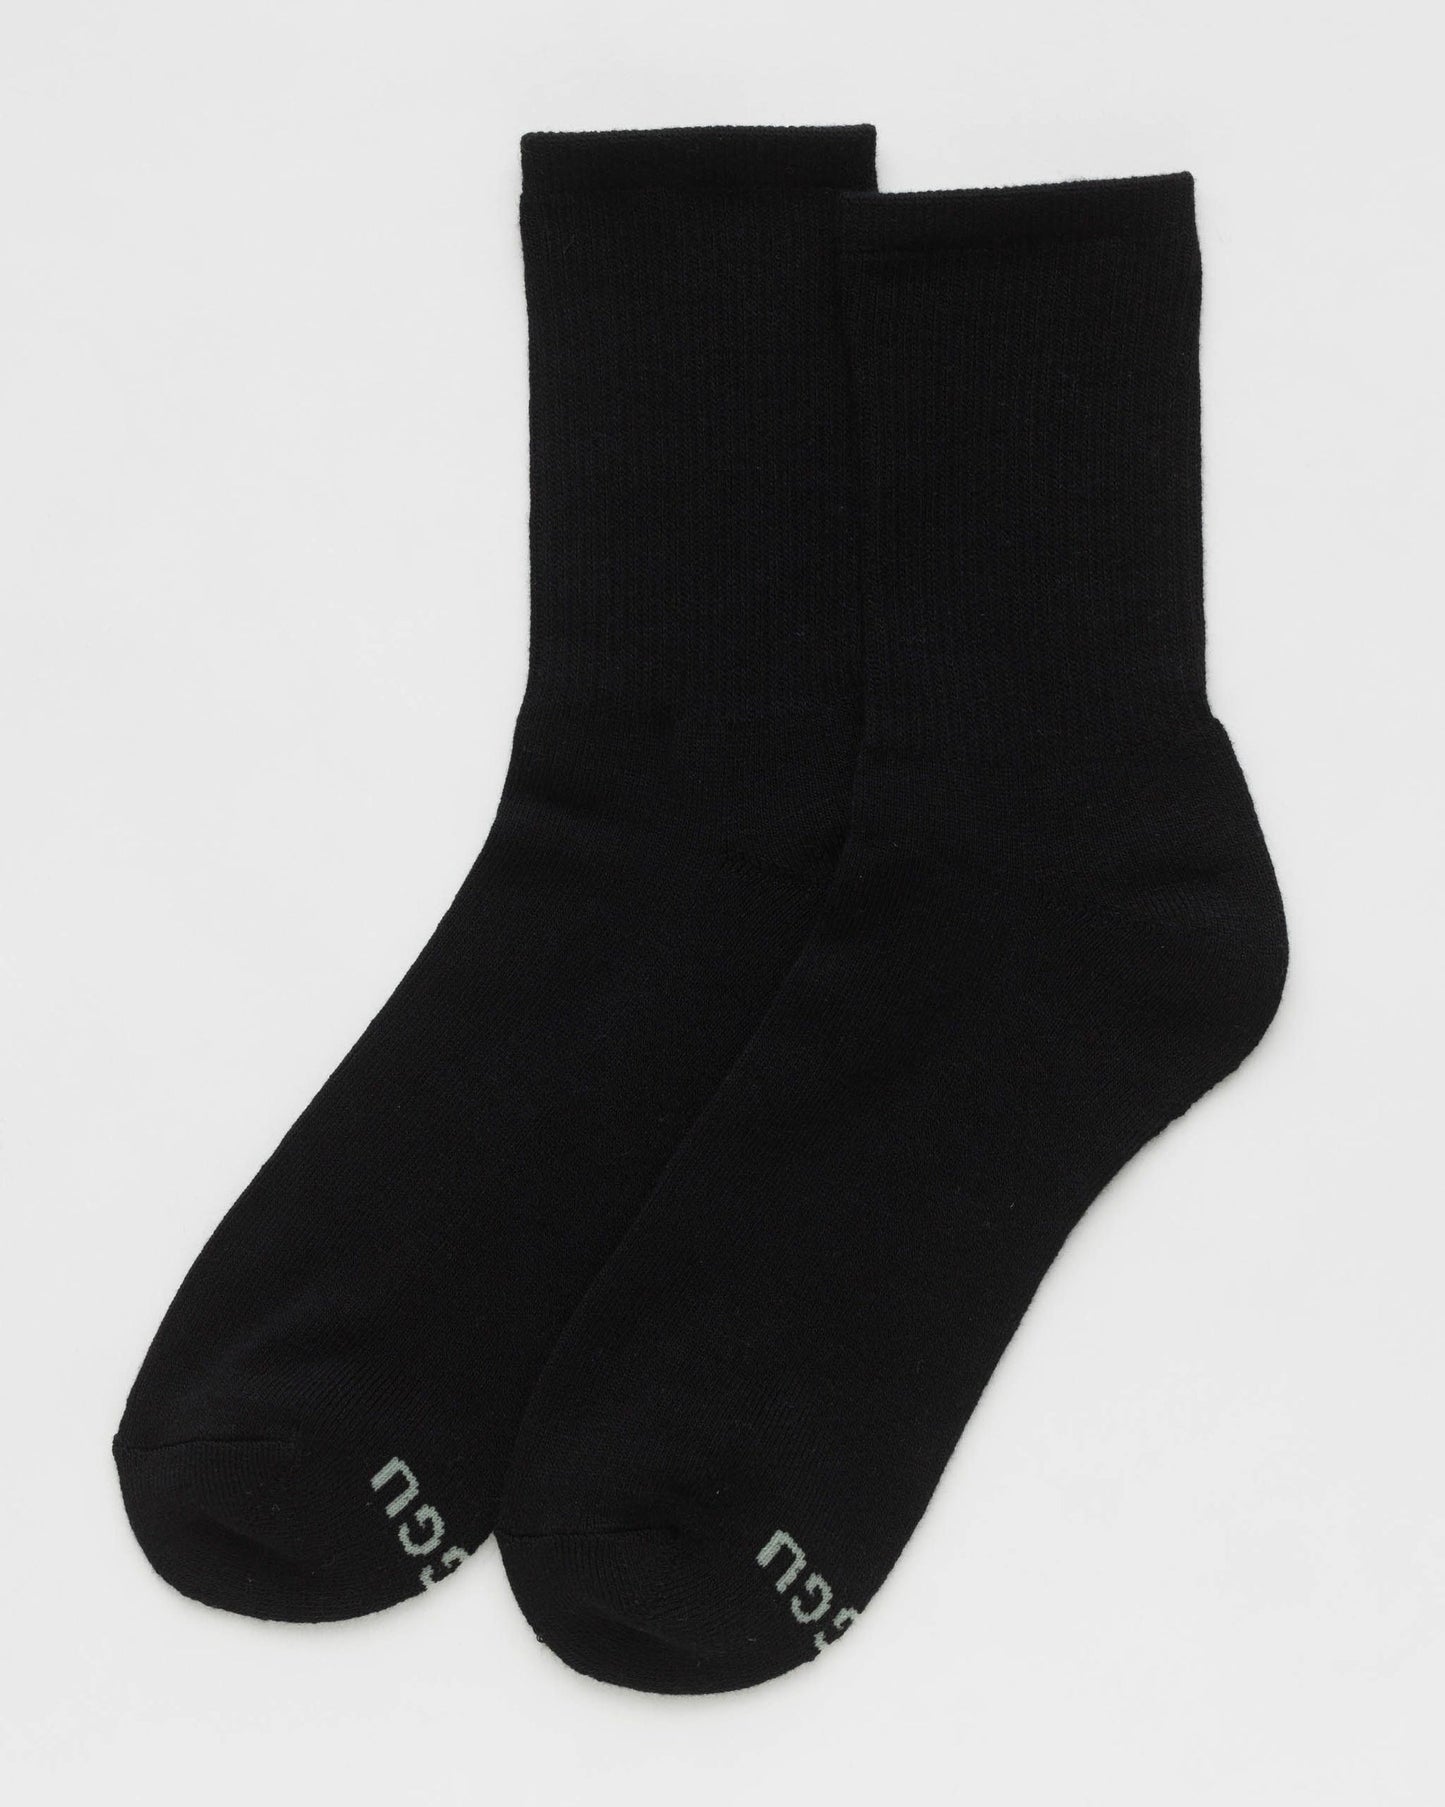 Ribbed Black Chaussette